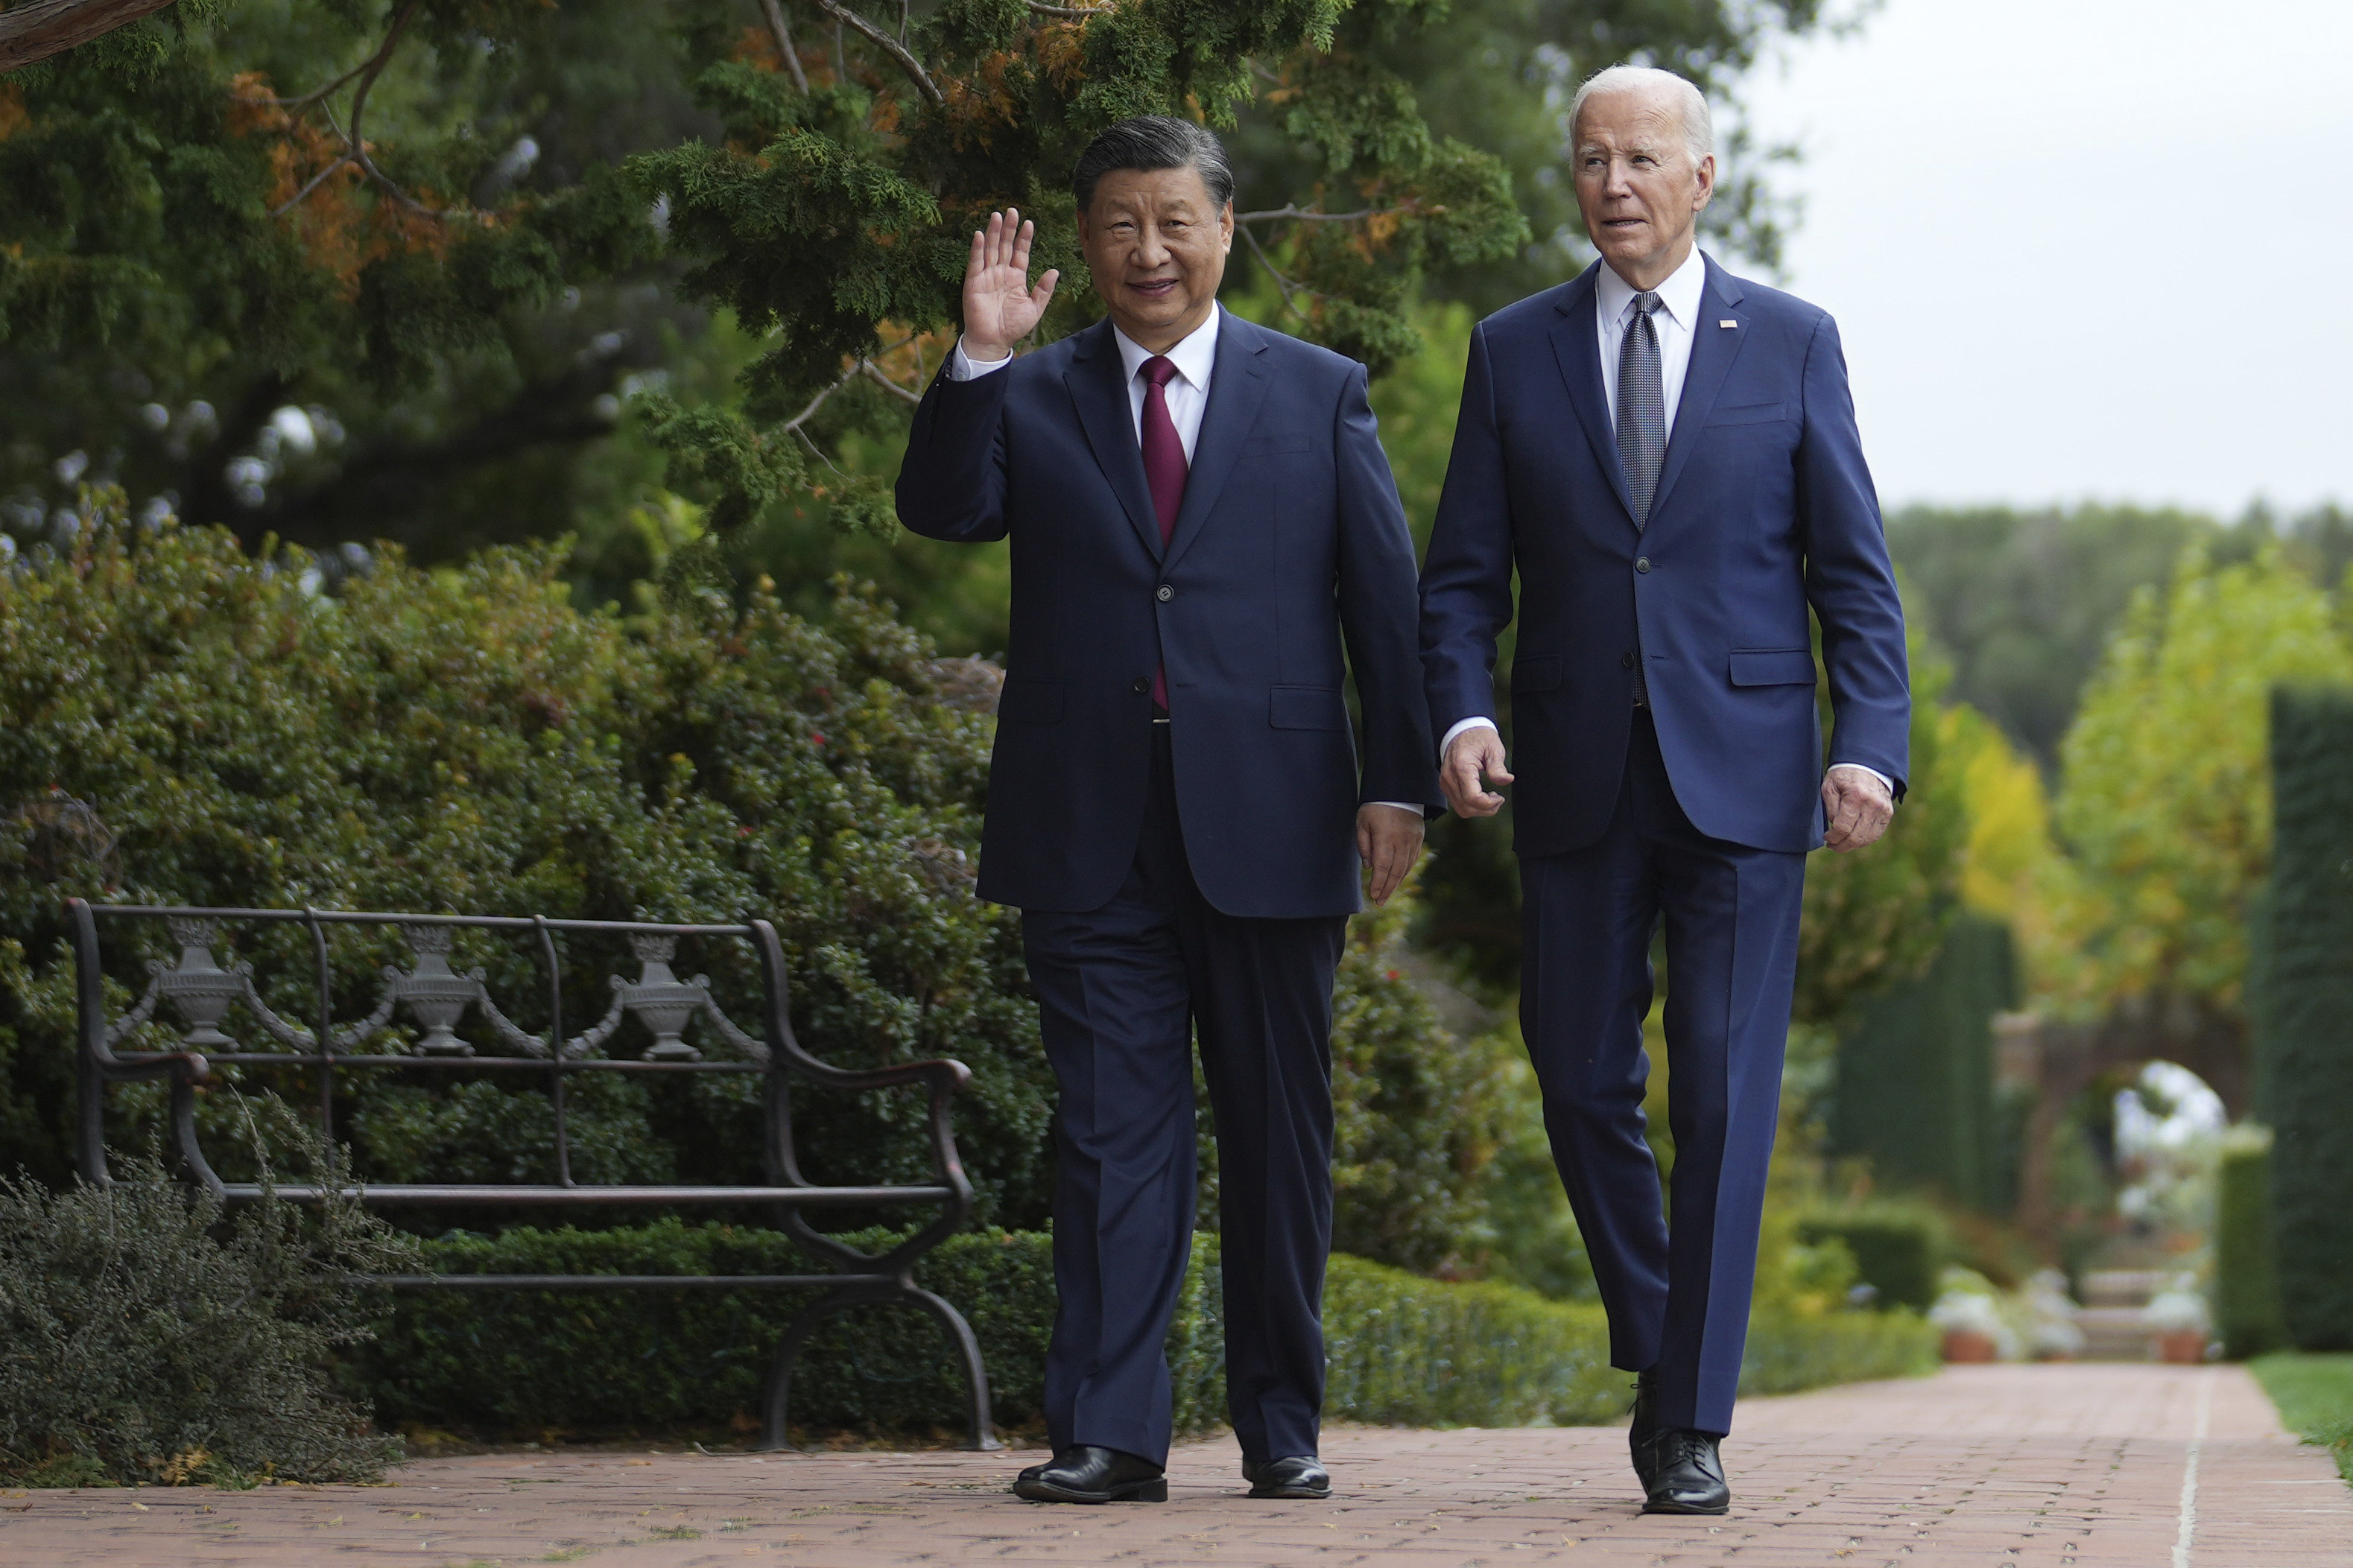 Presidents Xi Jinping and Joe Biden take a walk in November on the sidelines of the Asia-Pacific Economic Cooperative conference in California. Photo: AP